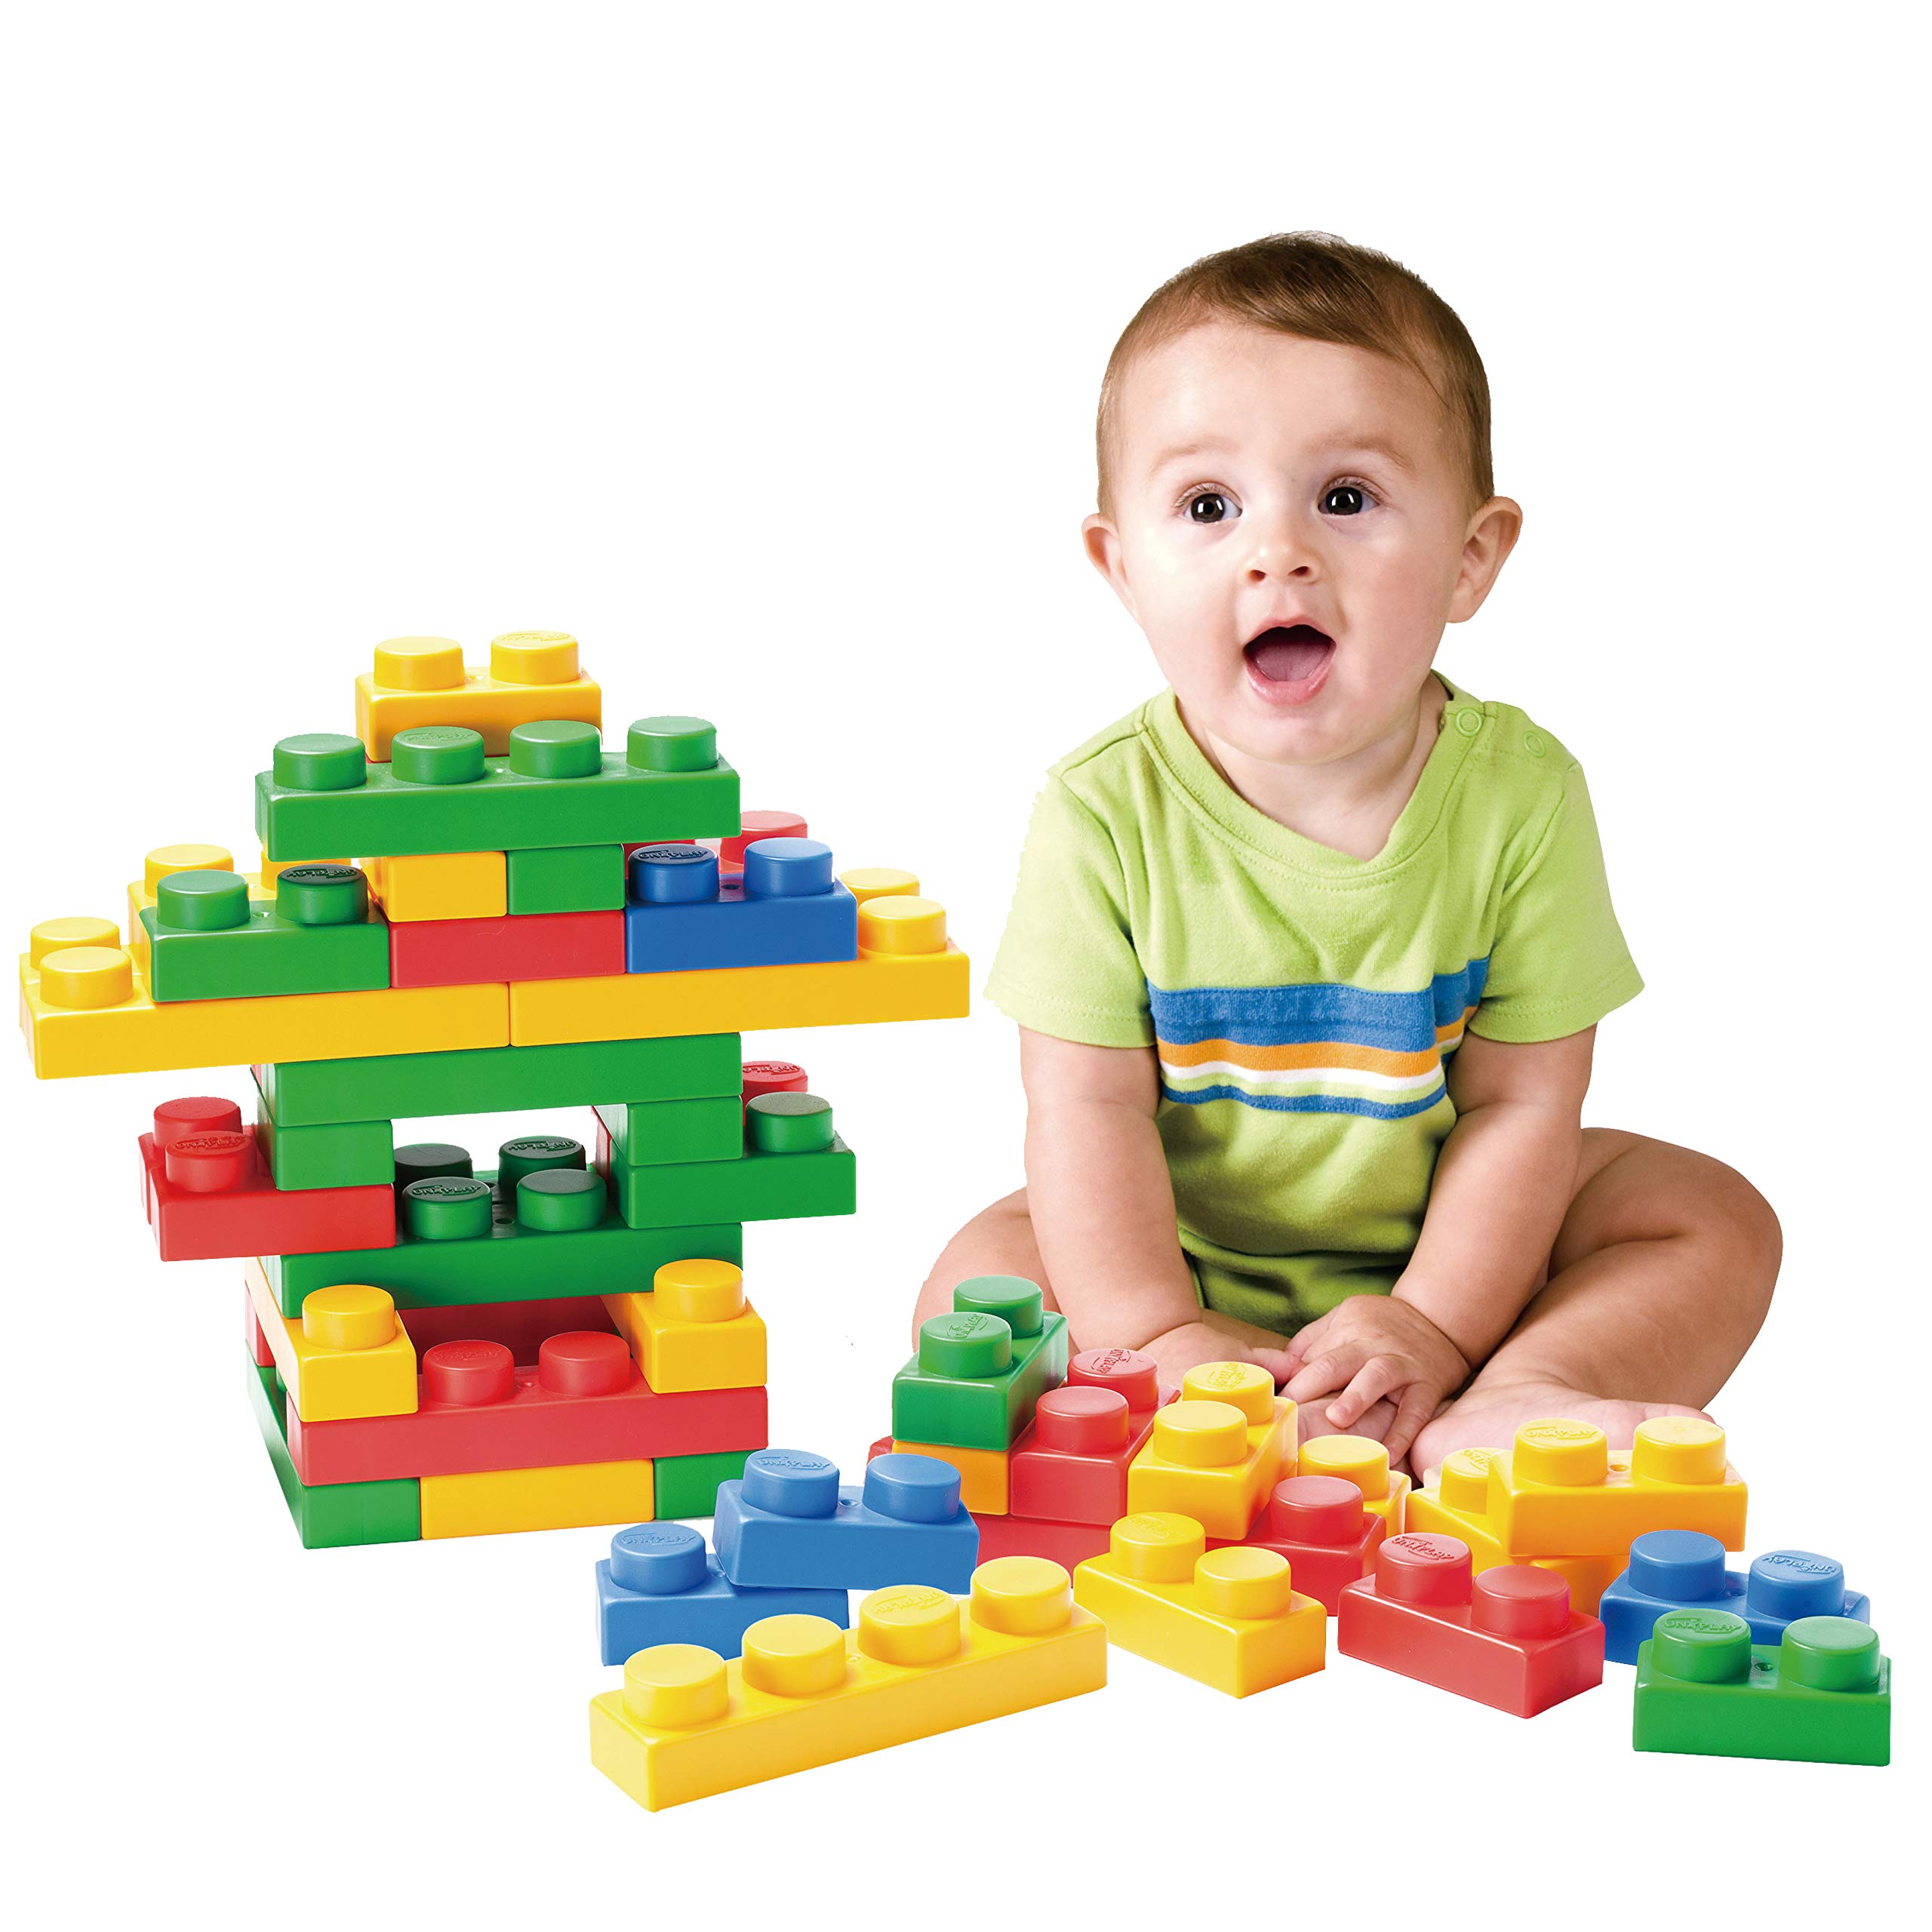 UNiPLAY Basic Soft Building Blocks — Cognitive Development Toy, Educational Blocks, Interactive Sensory Chew Toy for Ages 3 Months and Up (36-Piece Set)